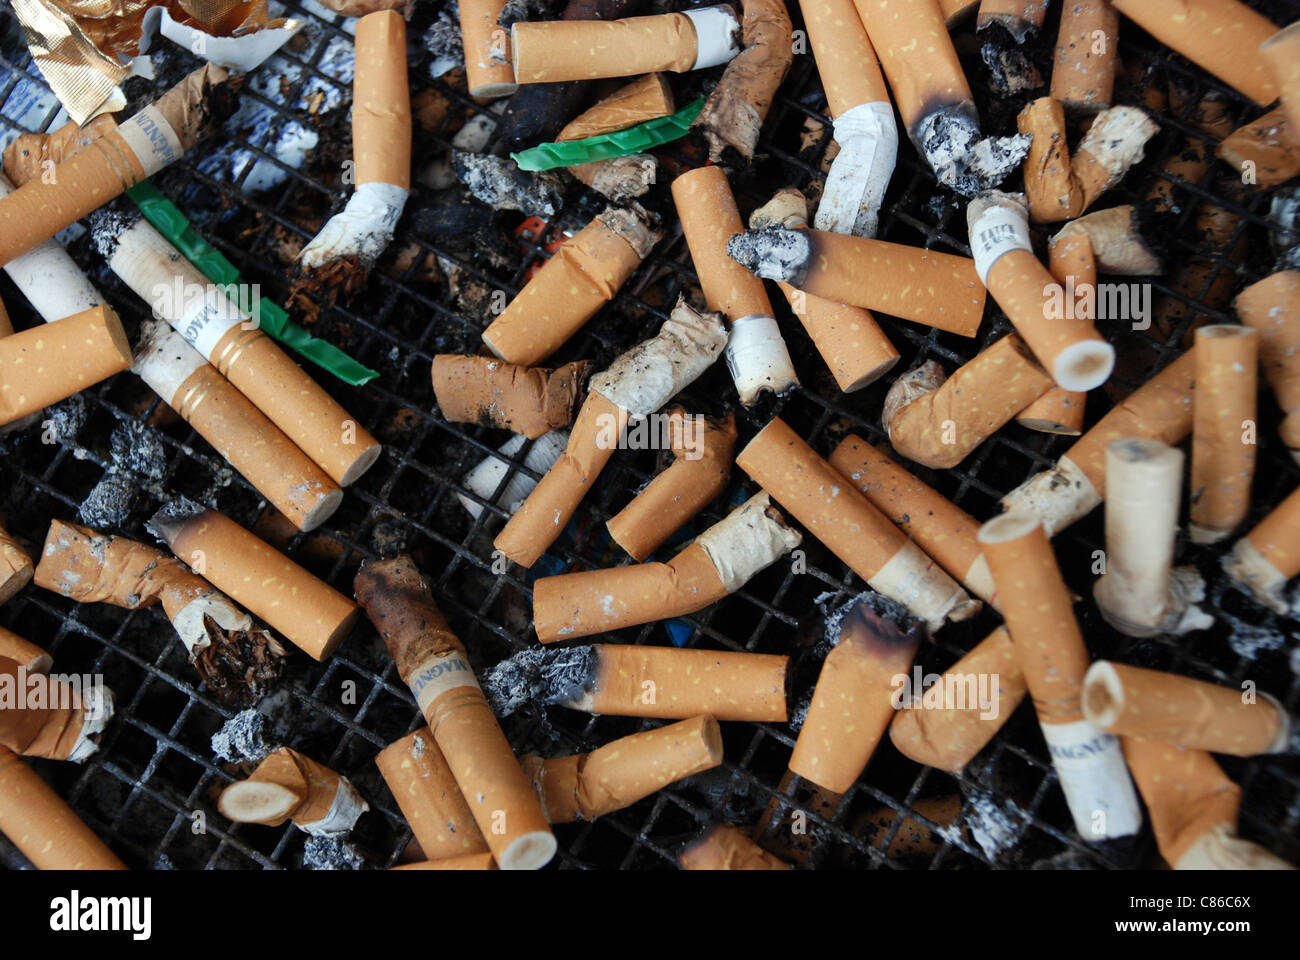 Cigarette butts in an ashtray cup Stock Photo